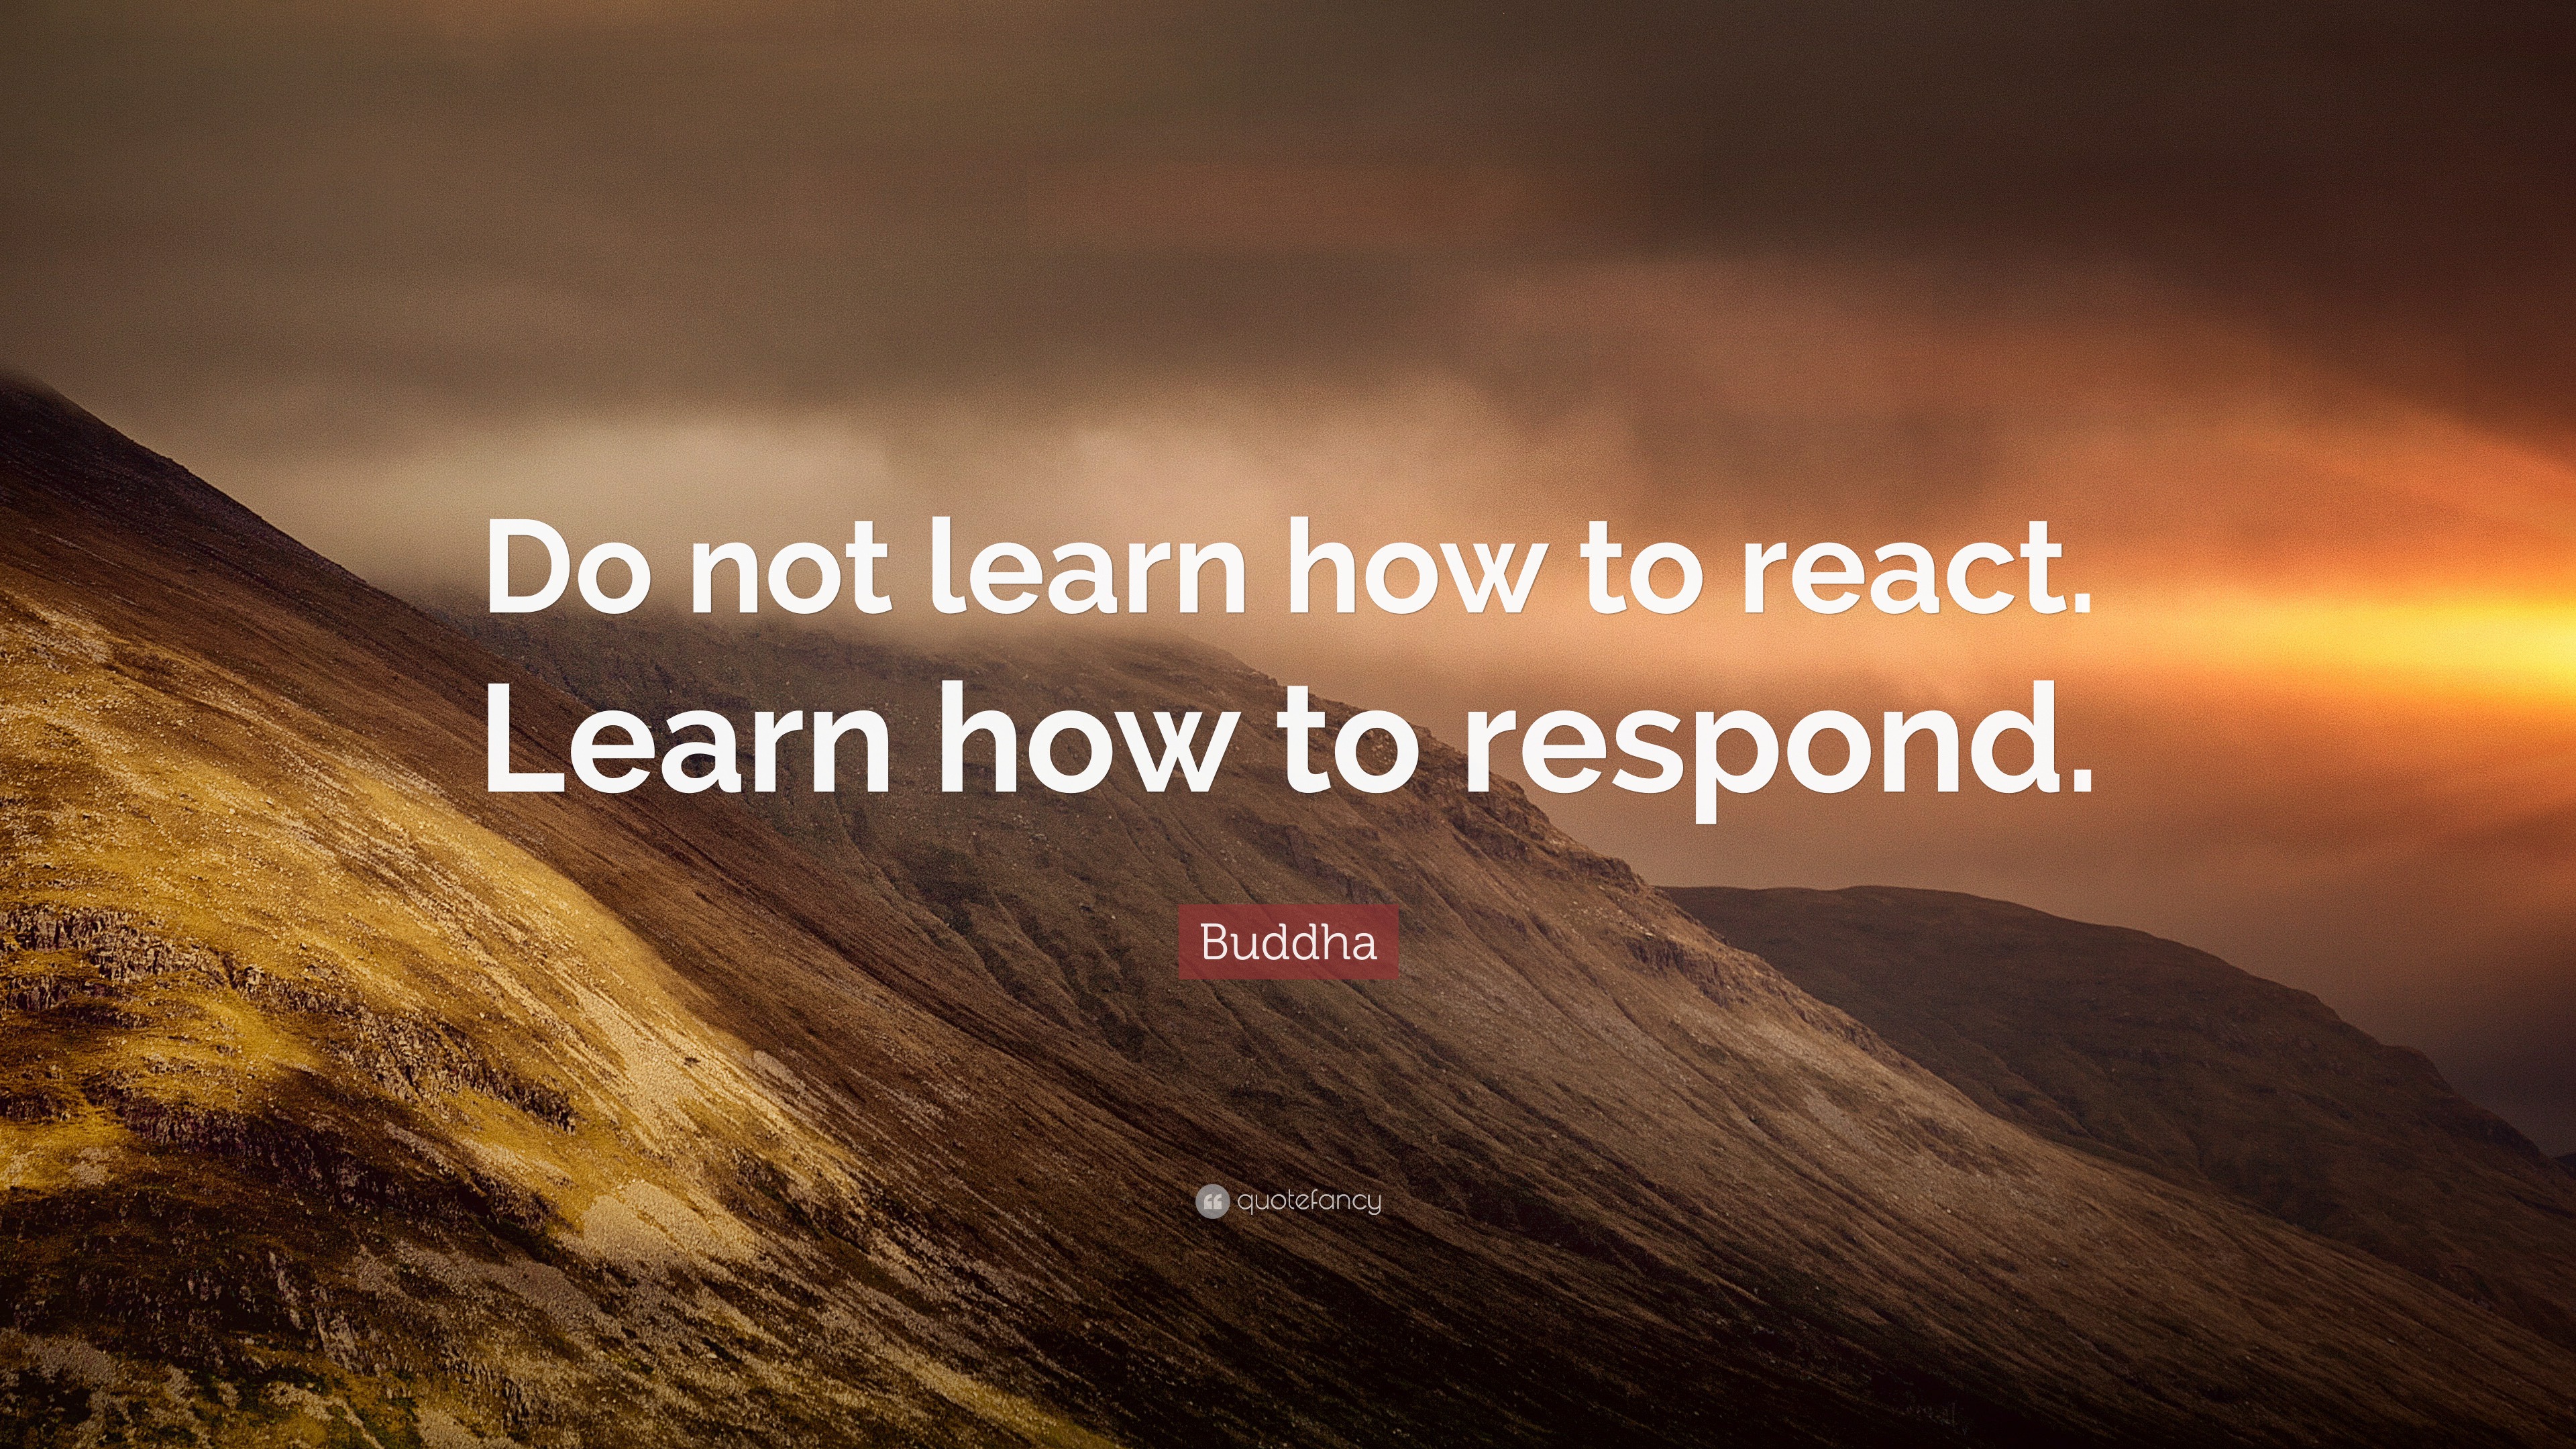 Buddha Quote: “Do not learn how to react. Learn how to respond.” (9